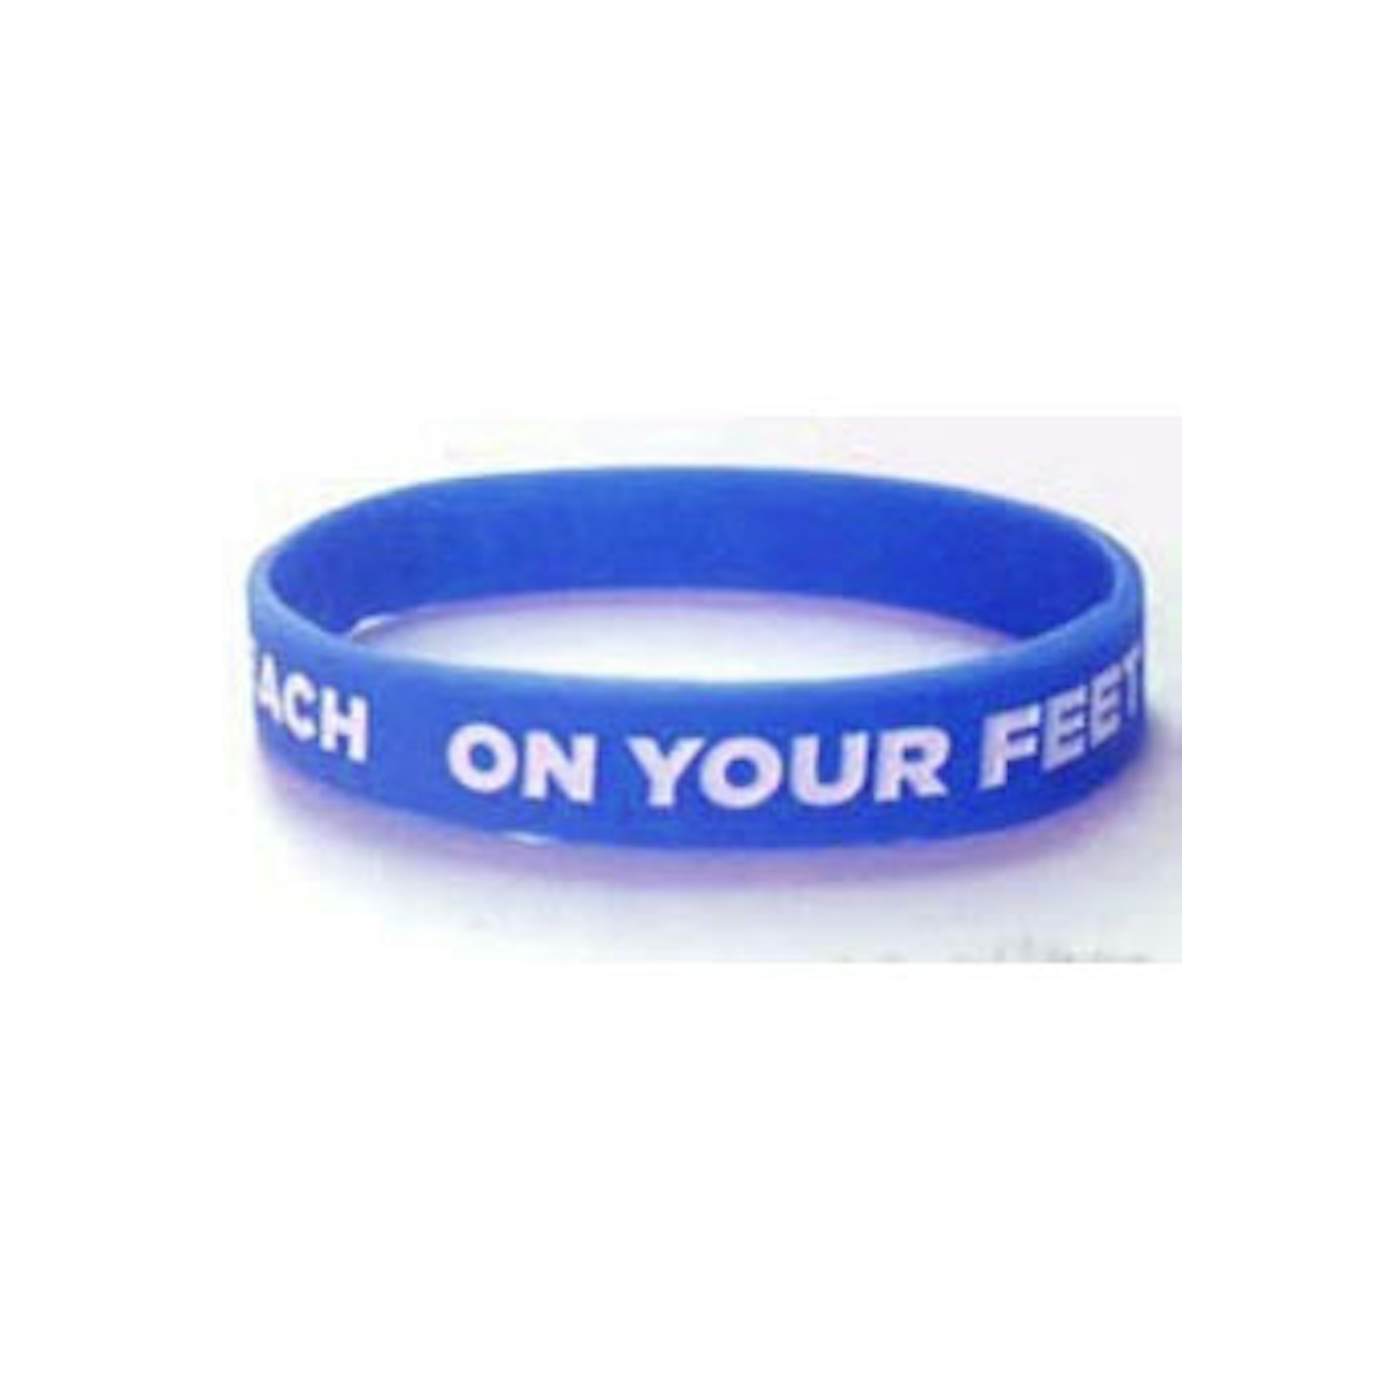 ON YOUR FEET: THE STORY OF EMILIO & GLORIA On Your Feet Blue Bracelet